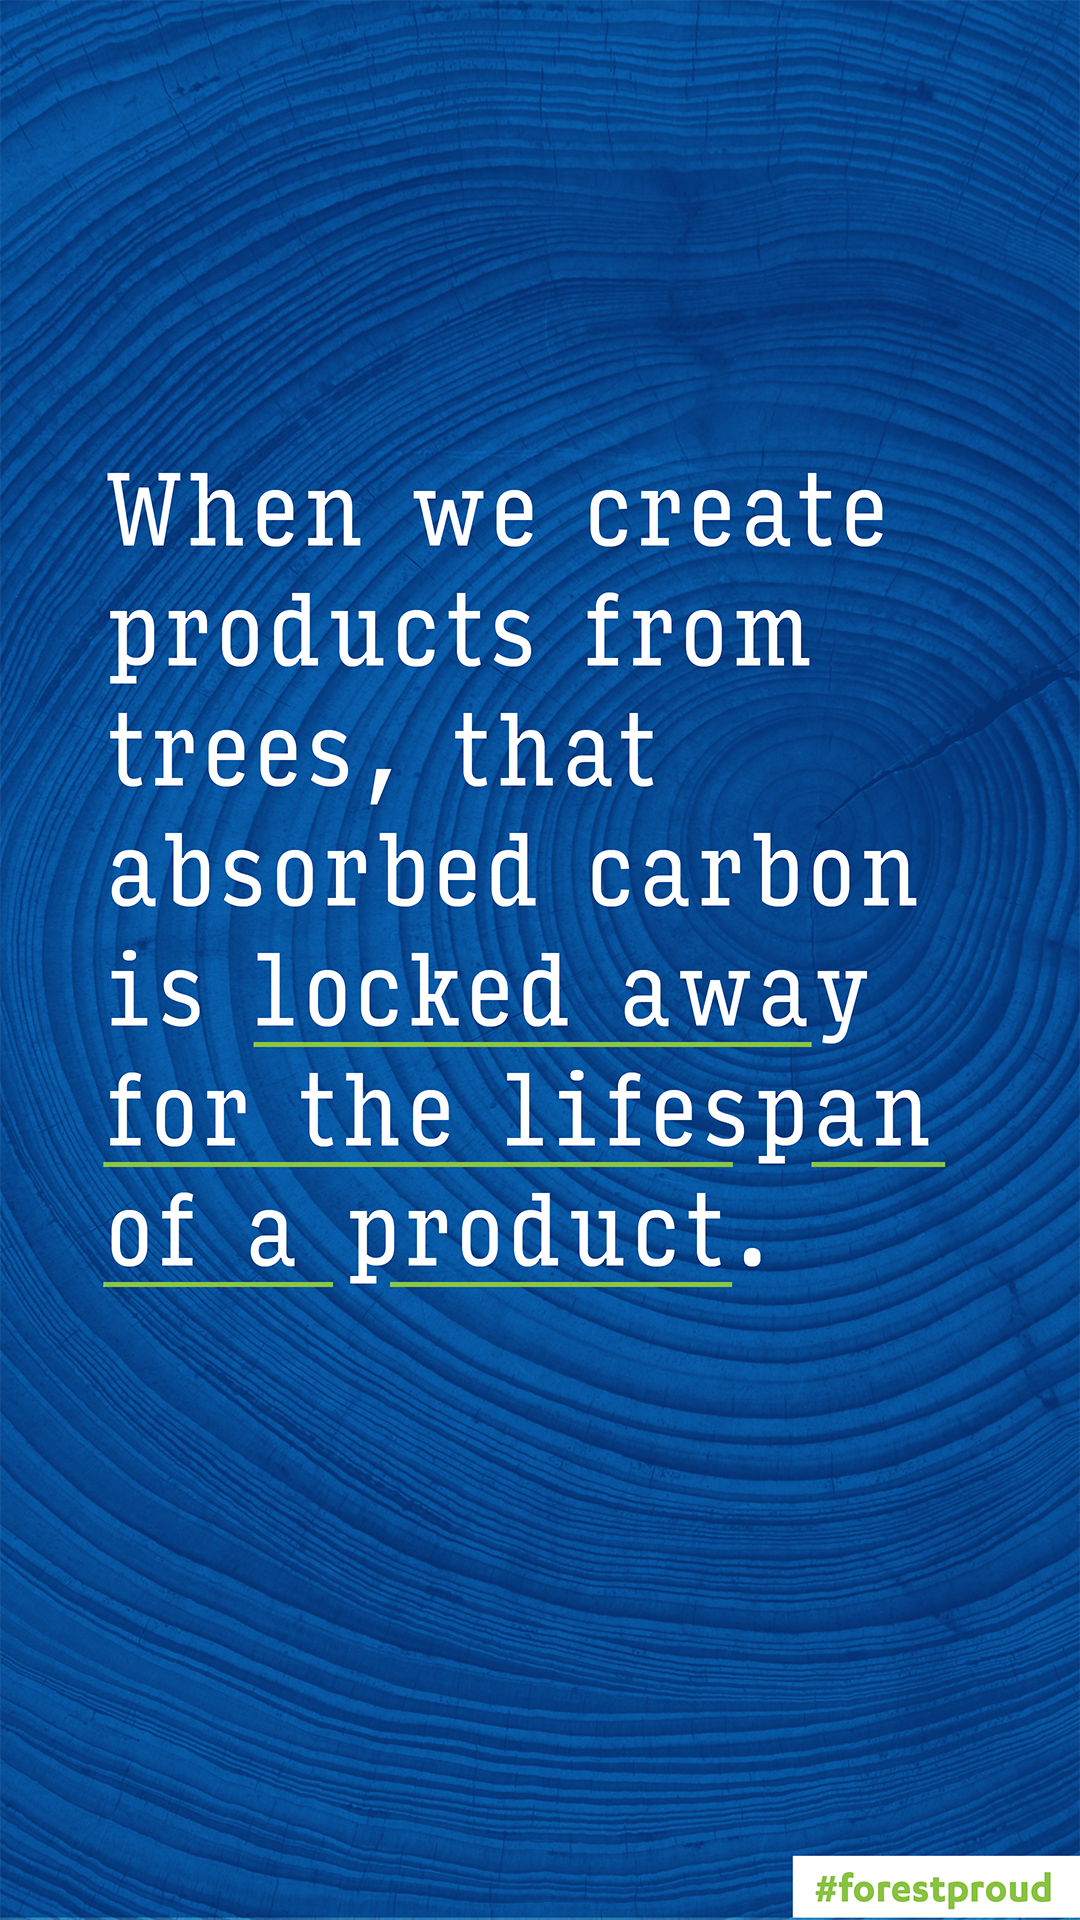 Products lock carbon away